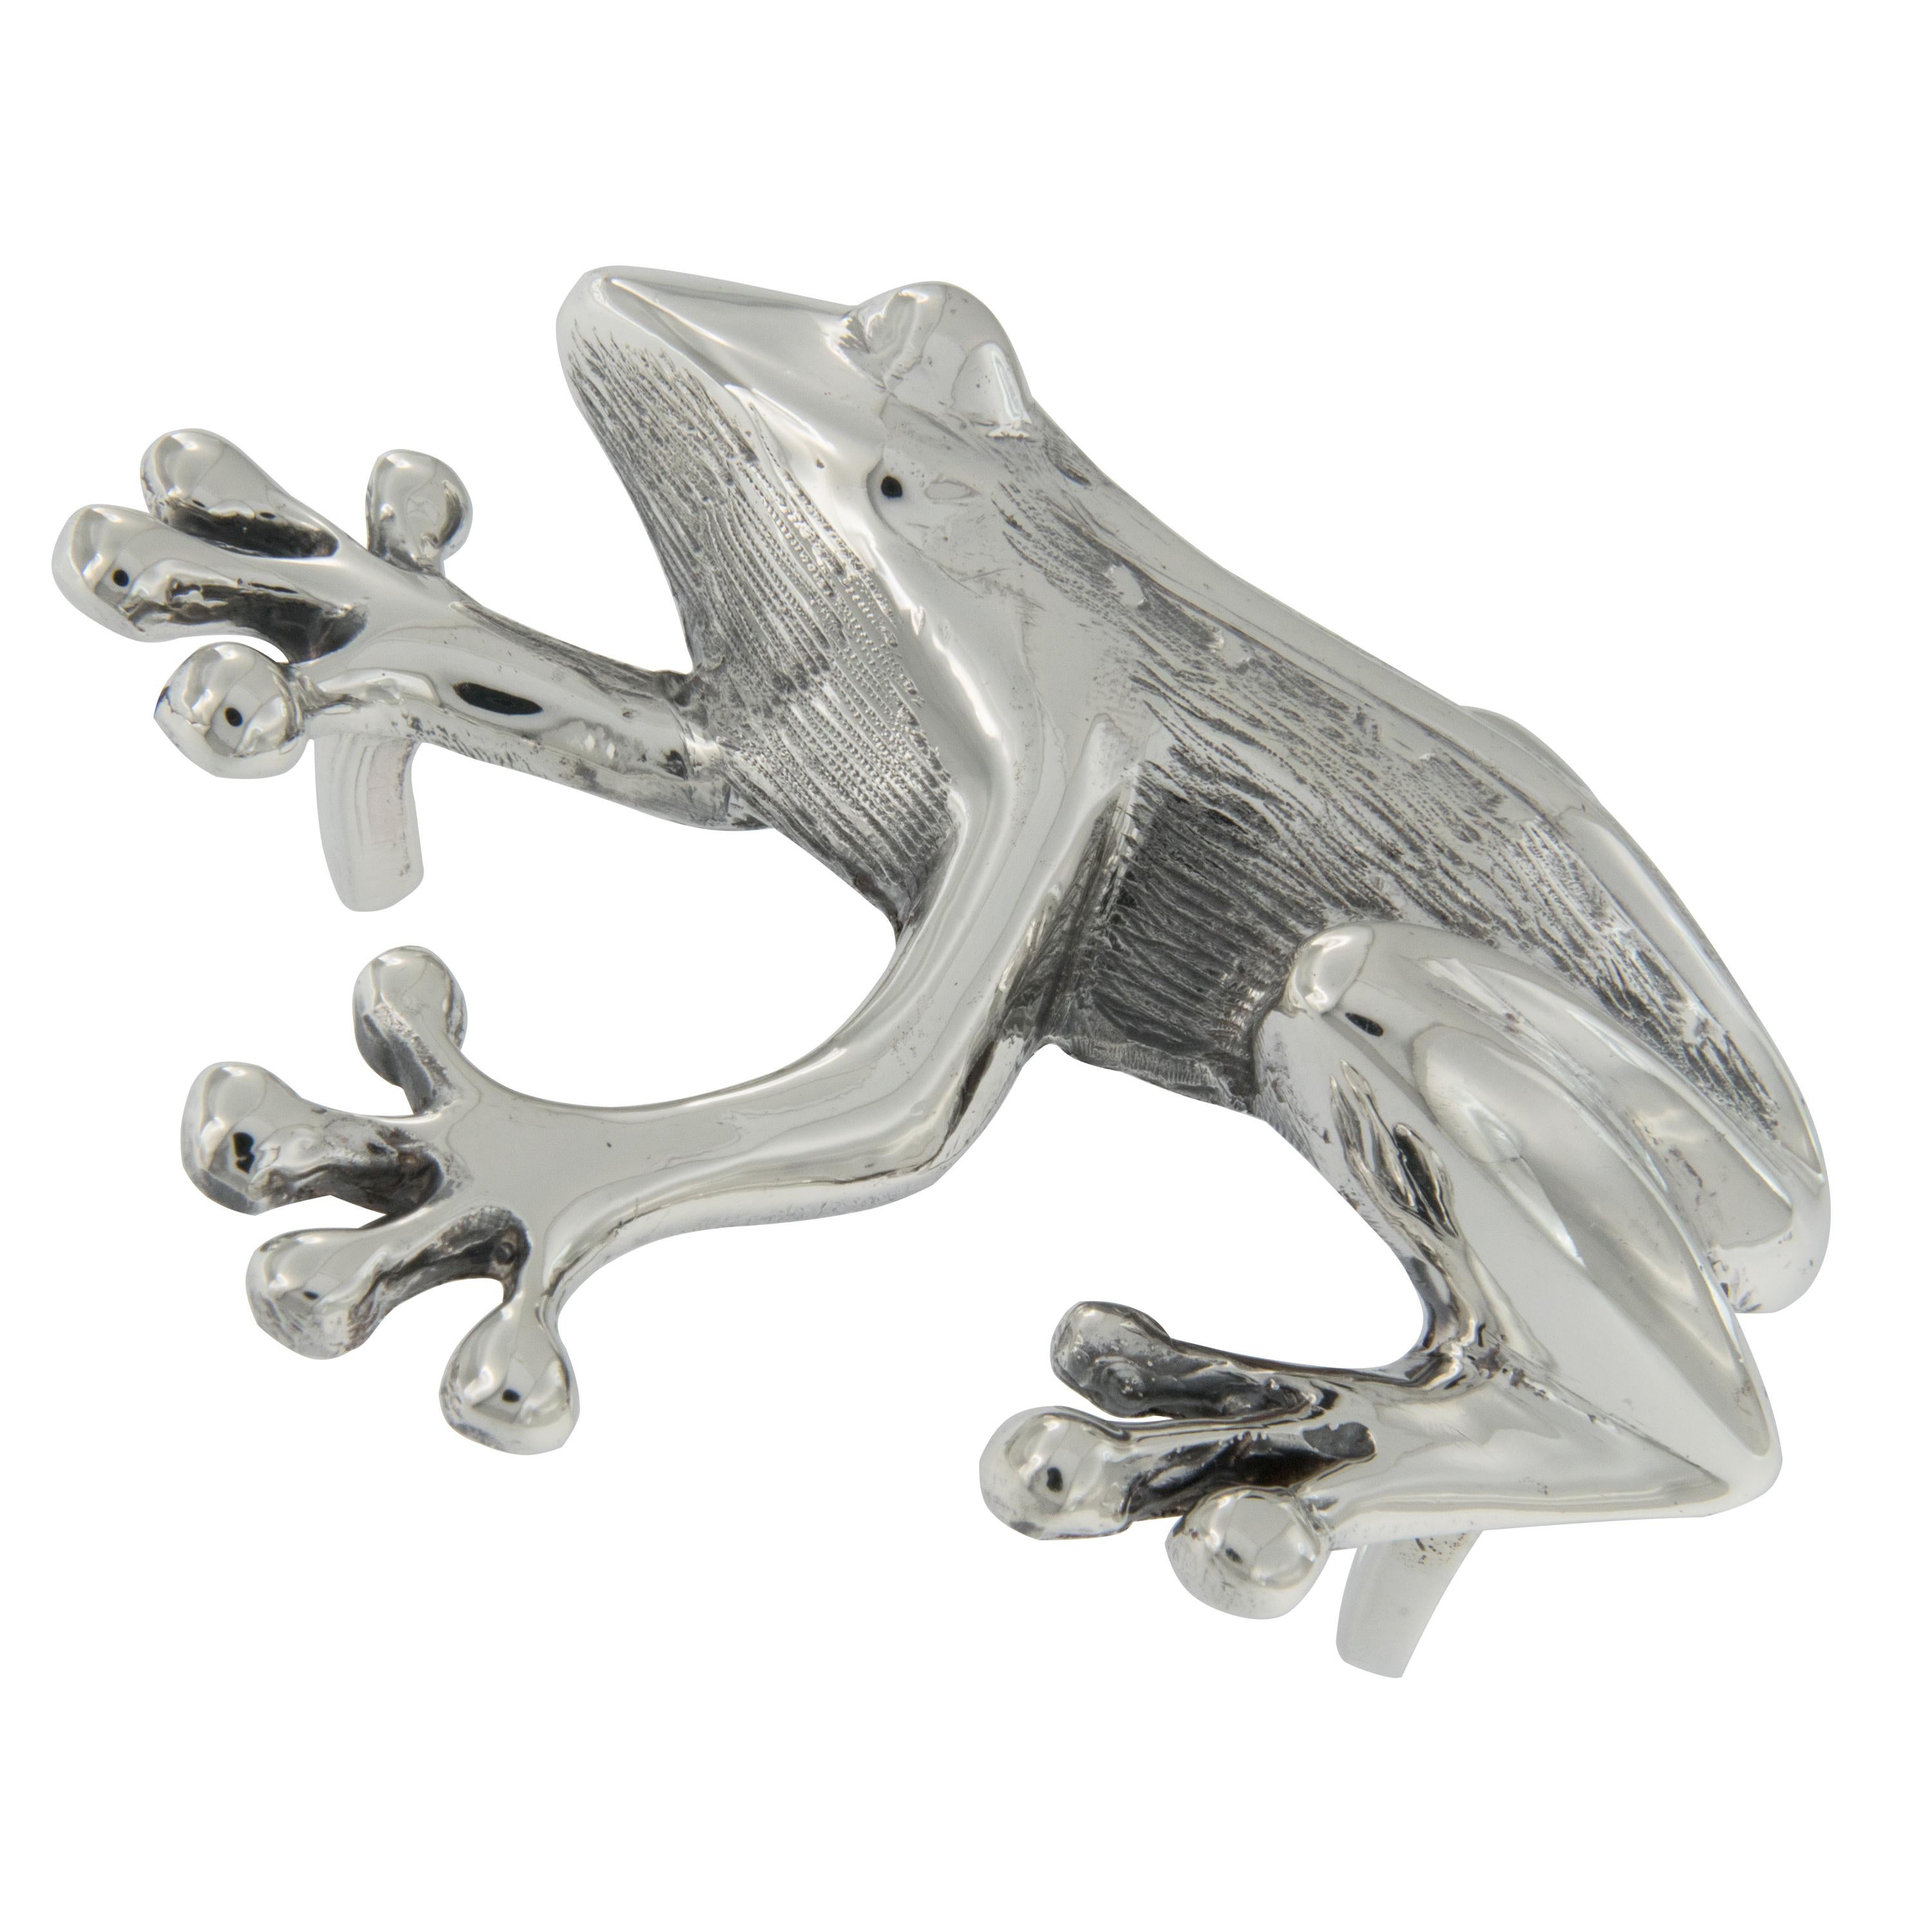 The native Americans believed that frogs were a sign of spring and renewal. This vintage, collectible Navajo buckle depicts a lifelike tree frog expertly crafted in sterling silver with exceptional attention to detail. Renew your outfits by adding